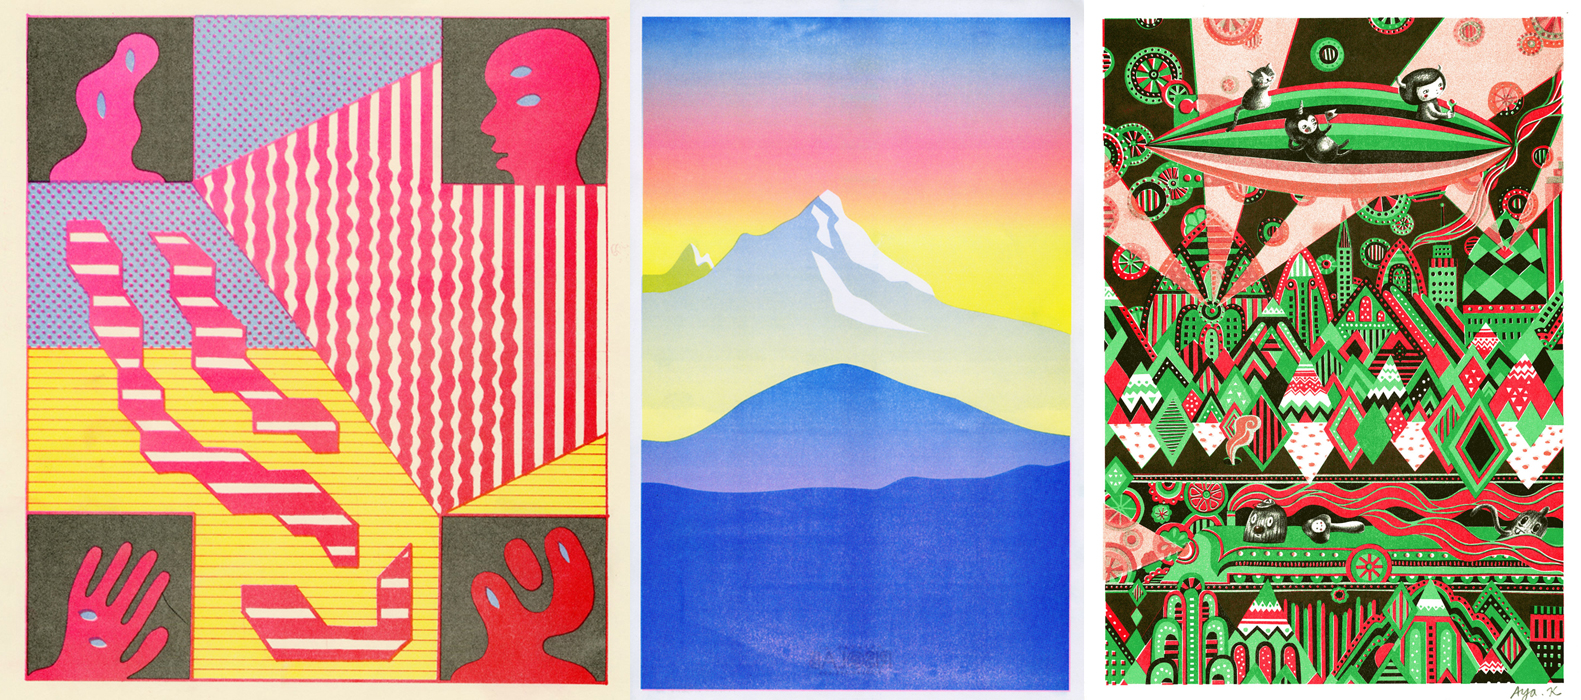 Three colorful riso prints, one on the left with abstracted shapes and patterns, the center image of a mountain landscape, and the right image contains many complex and intricate shapes in red, black and green.